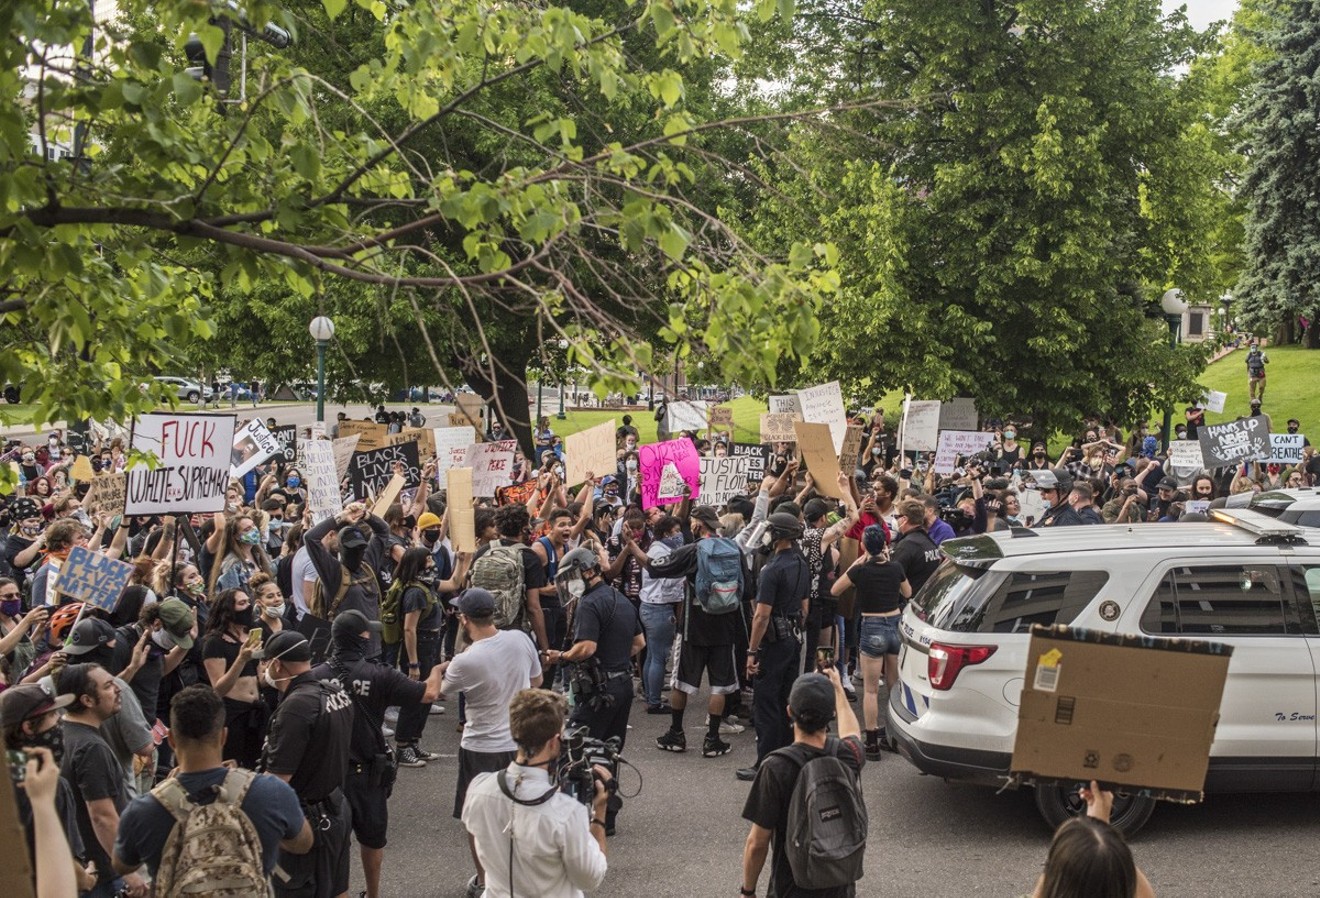 Demonstrators blocked the streets on May 28.